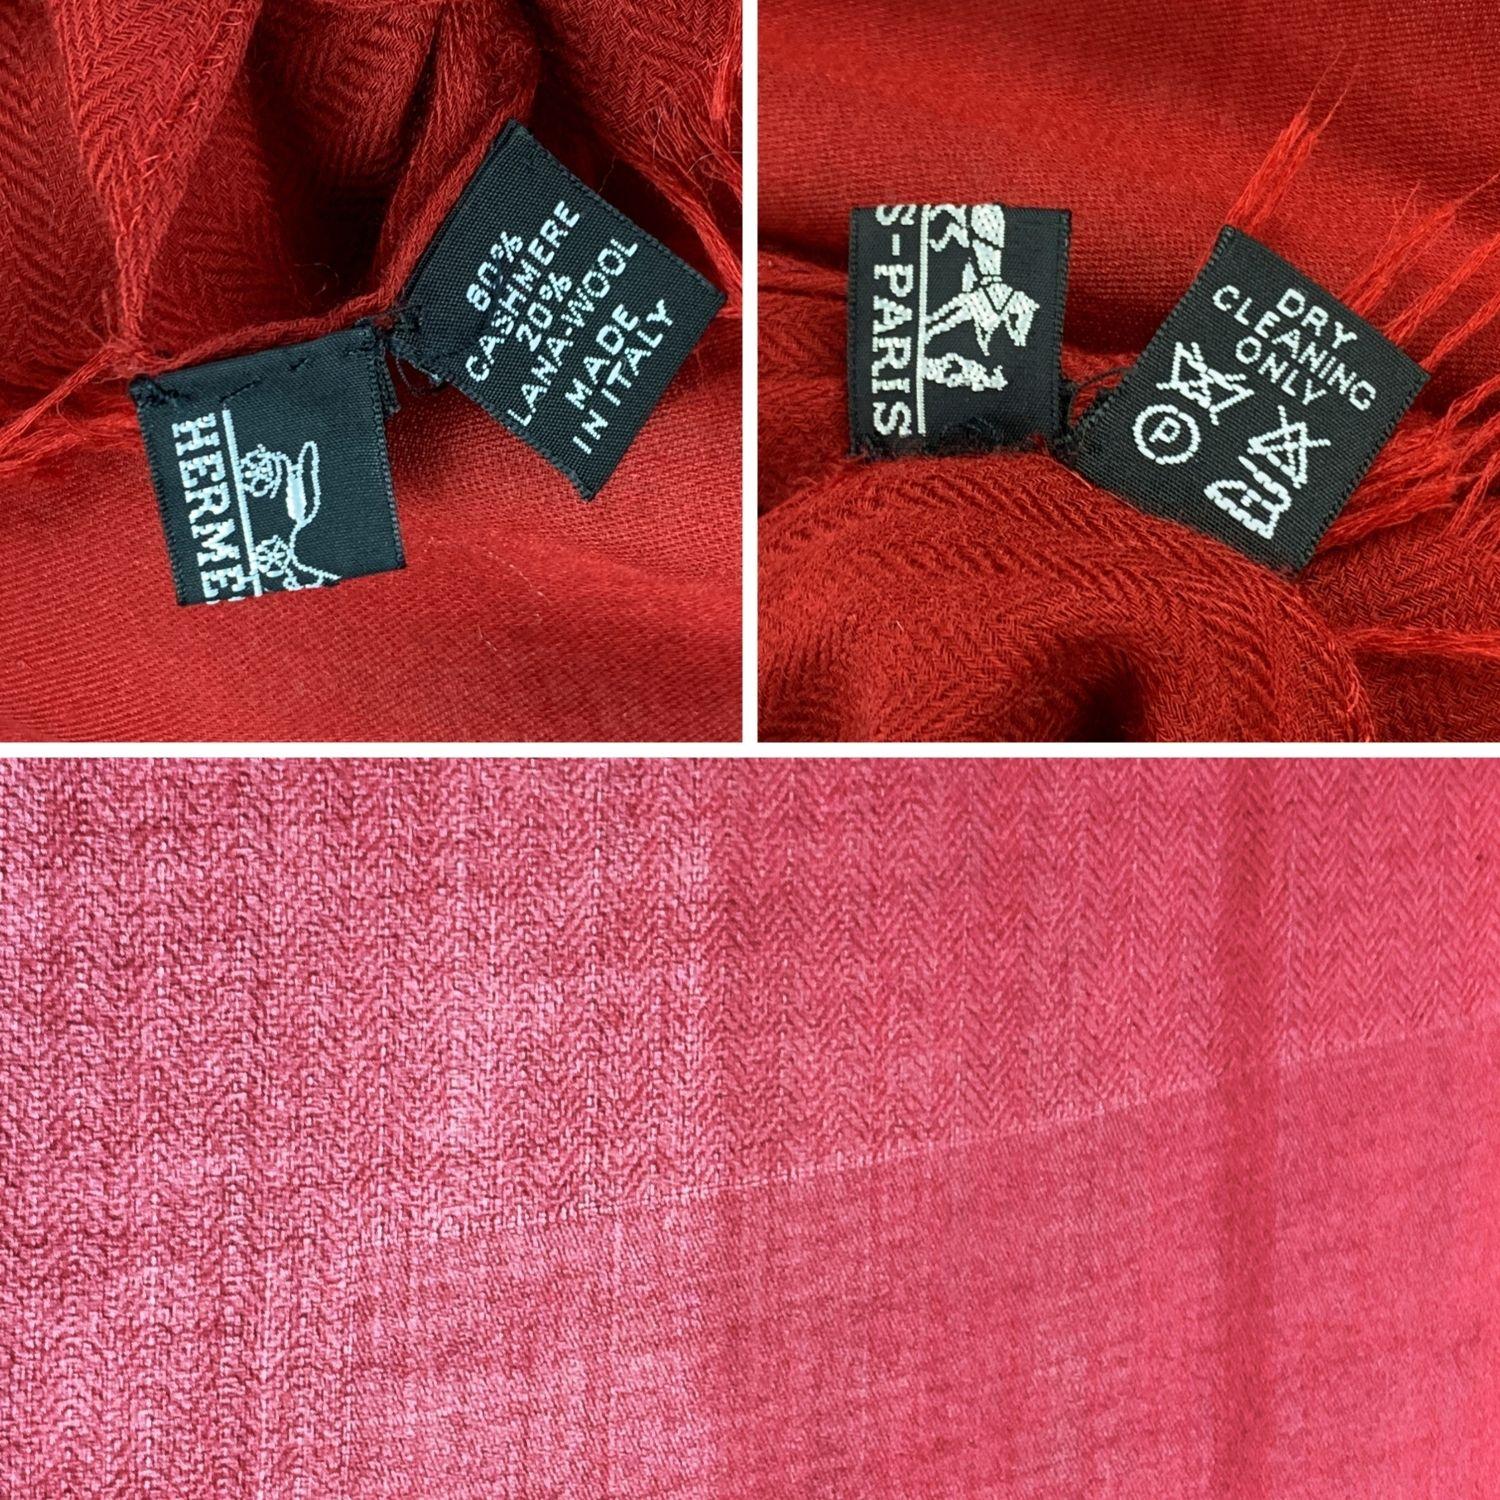 Rare cashmere and wool scarf by Hermes. Red color. Big H pattern in the center. Composition; 80% Cashmere,20% Wool. Fringed hem. Approx. measurements: 60 x 80 inches - 152 x 203. Made in Italy. 'HERMES - Paris' and composition tags are still